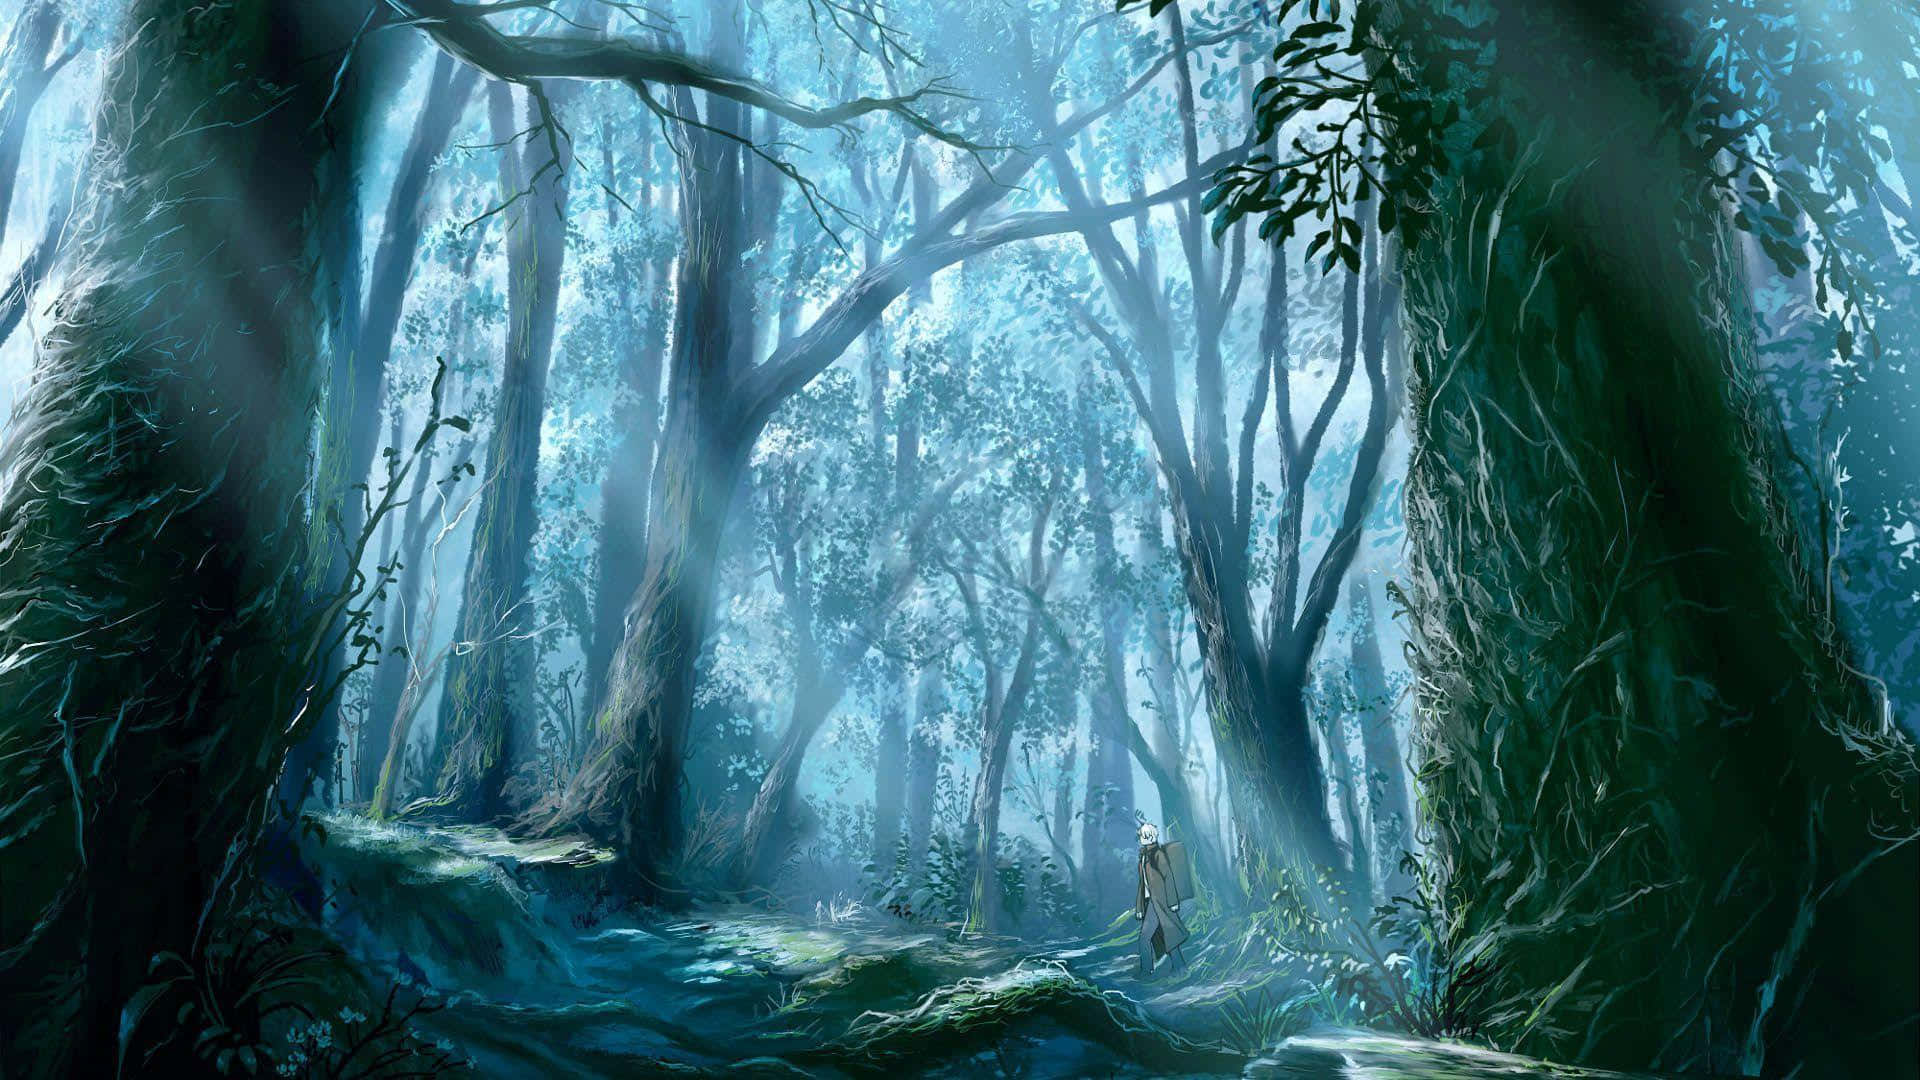 Feel the tranquility of the Anime Forest.